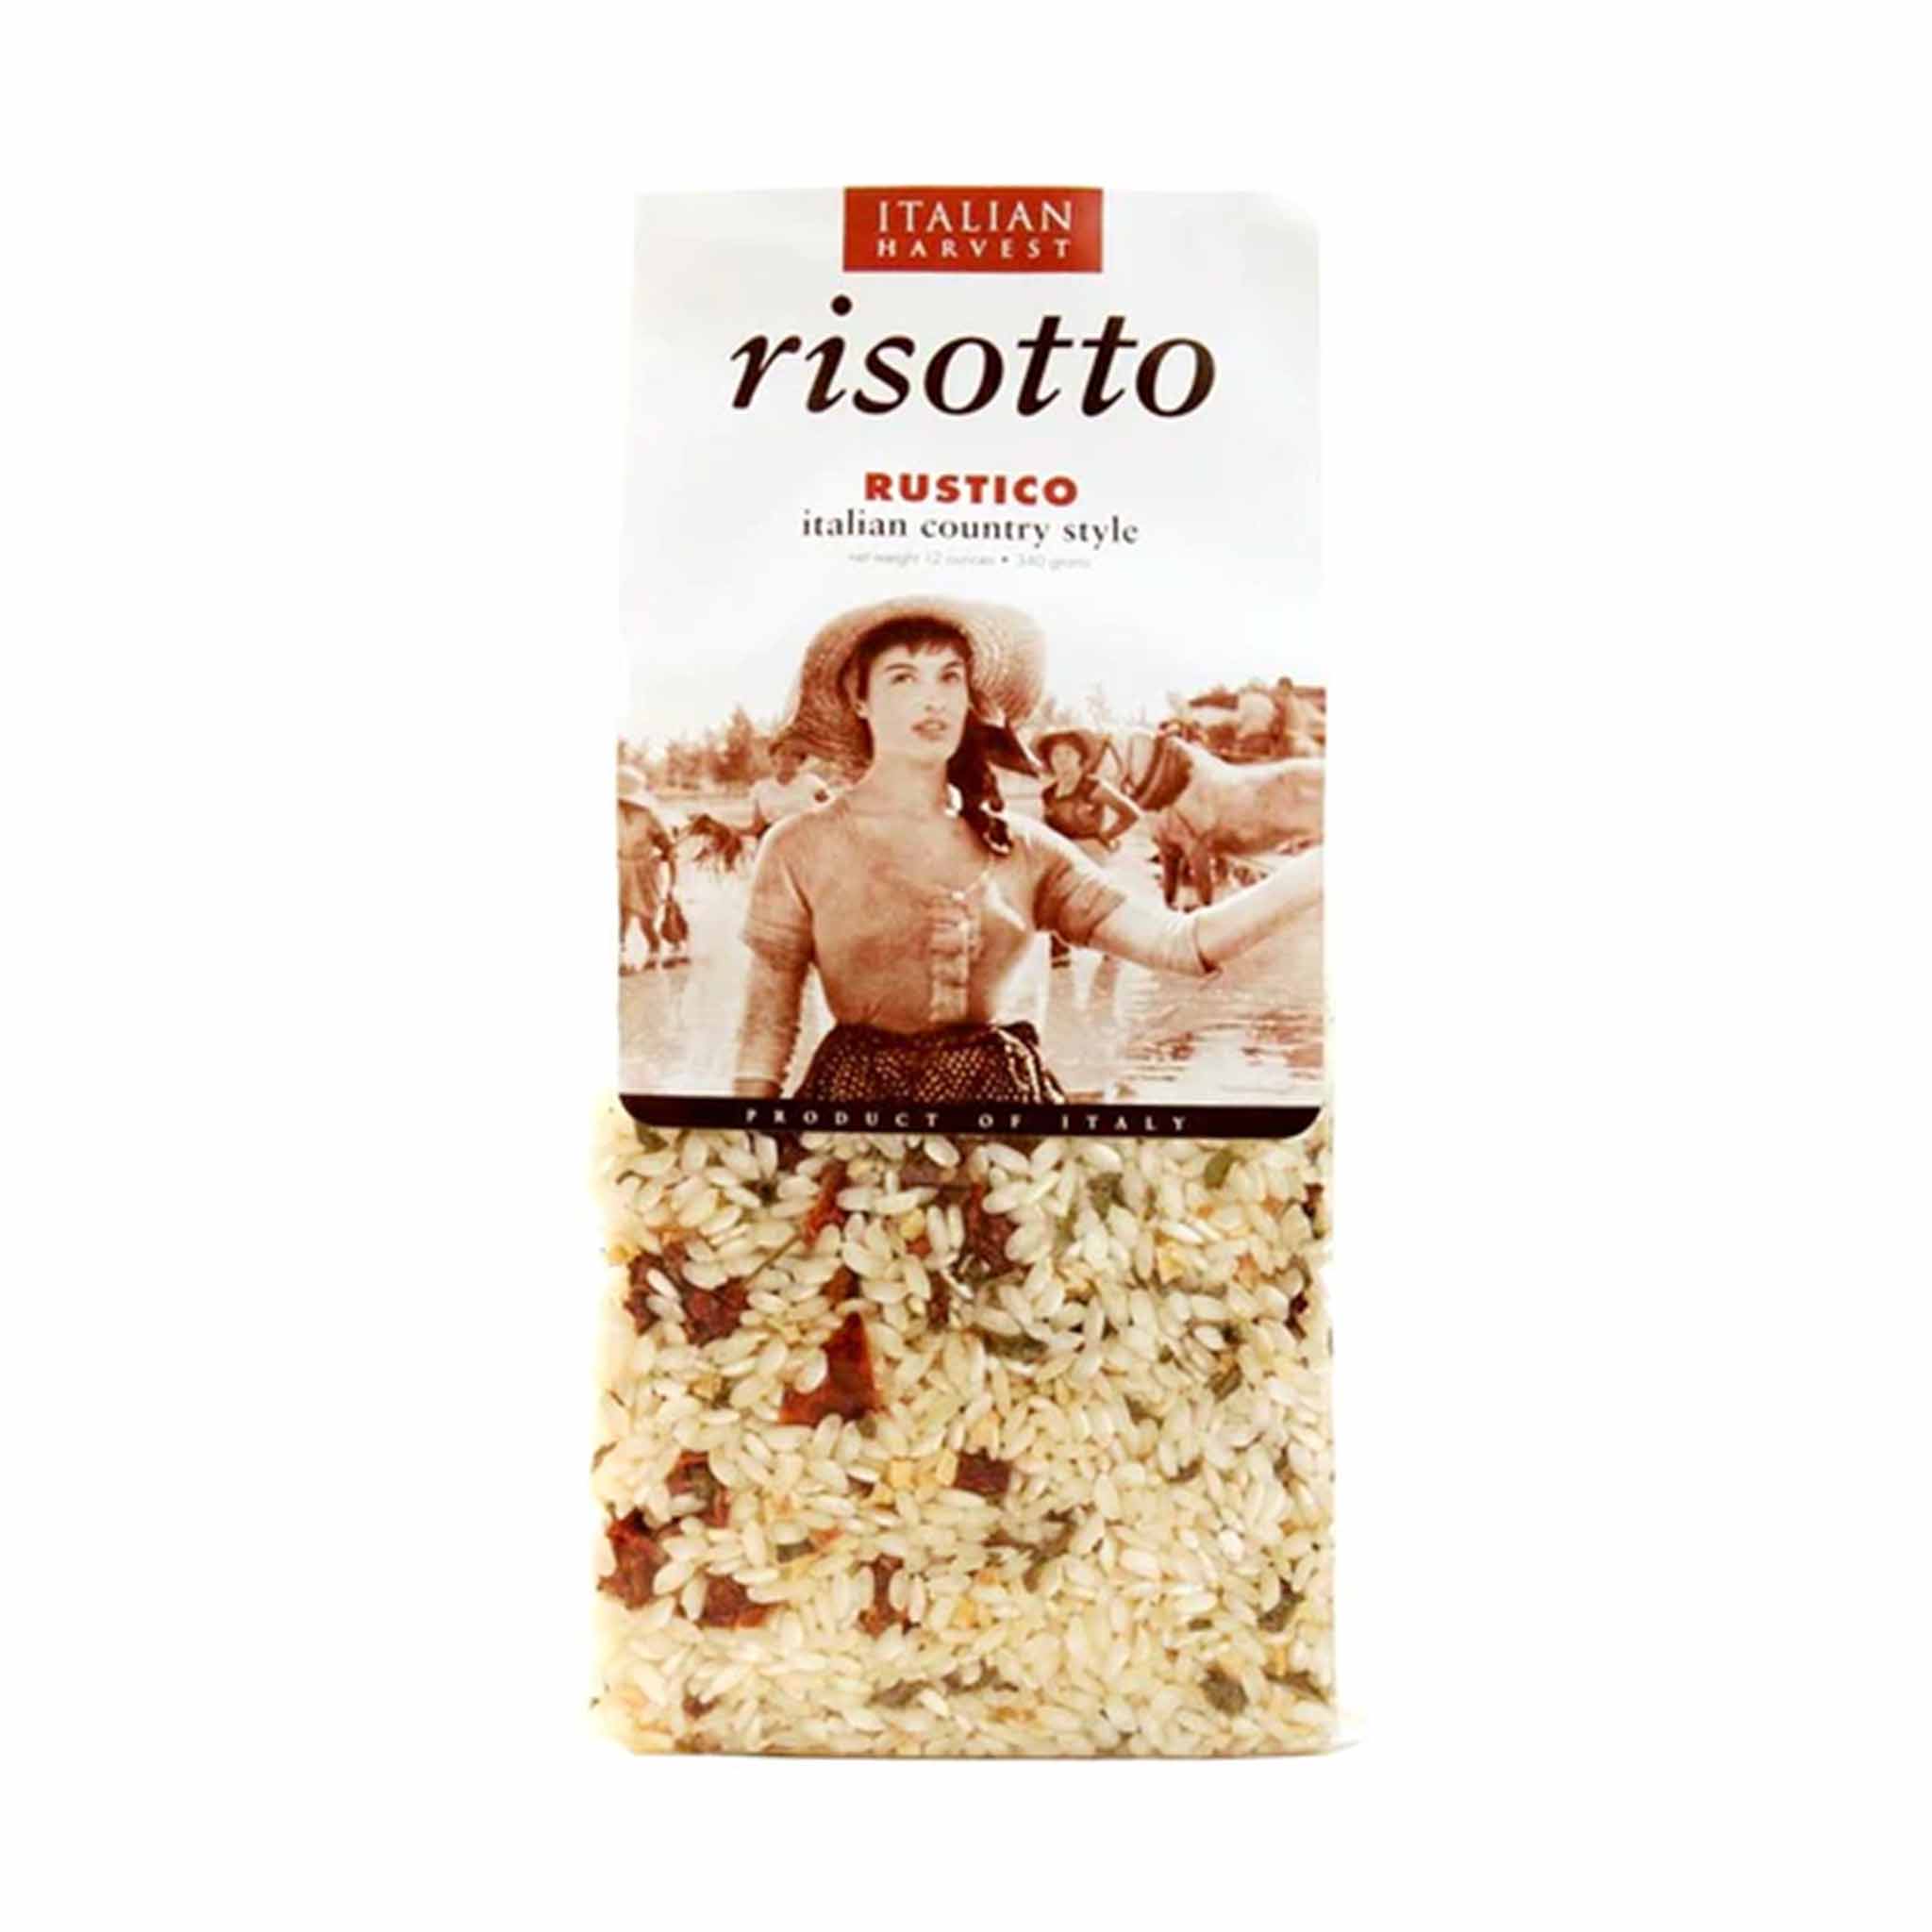 Italian Harvest Risotto Rustico Country Style